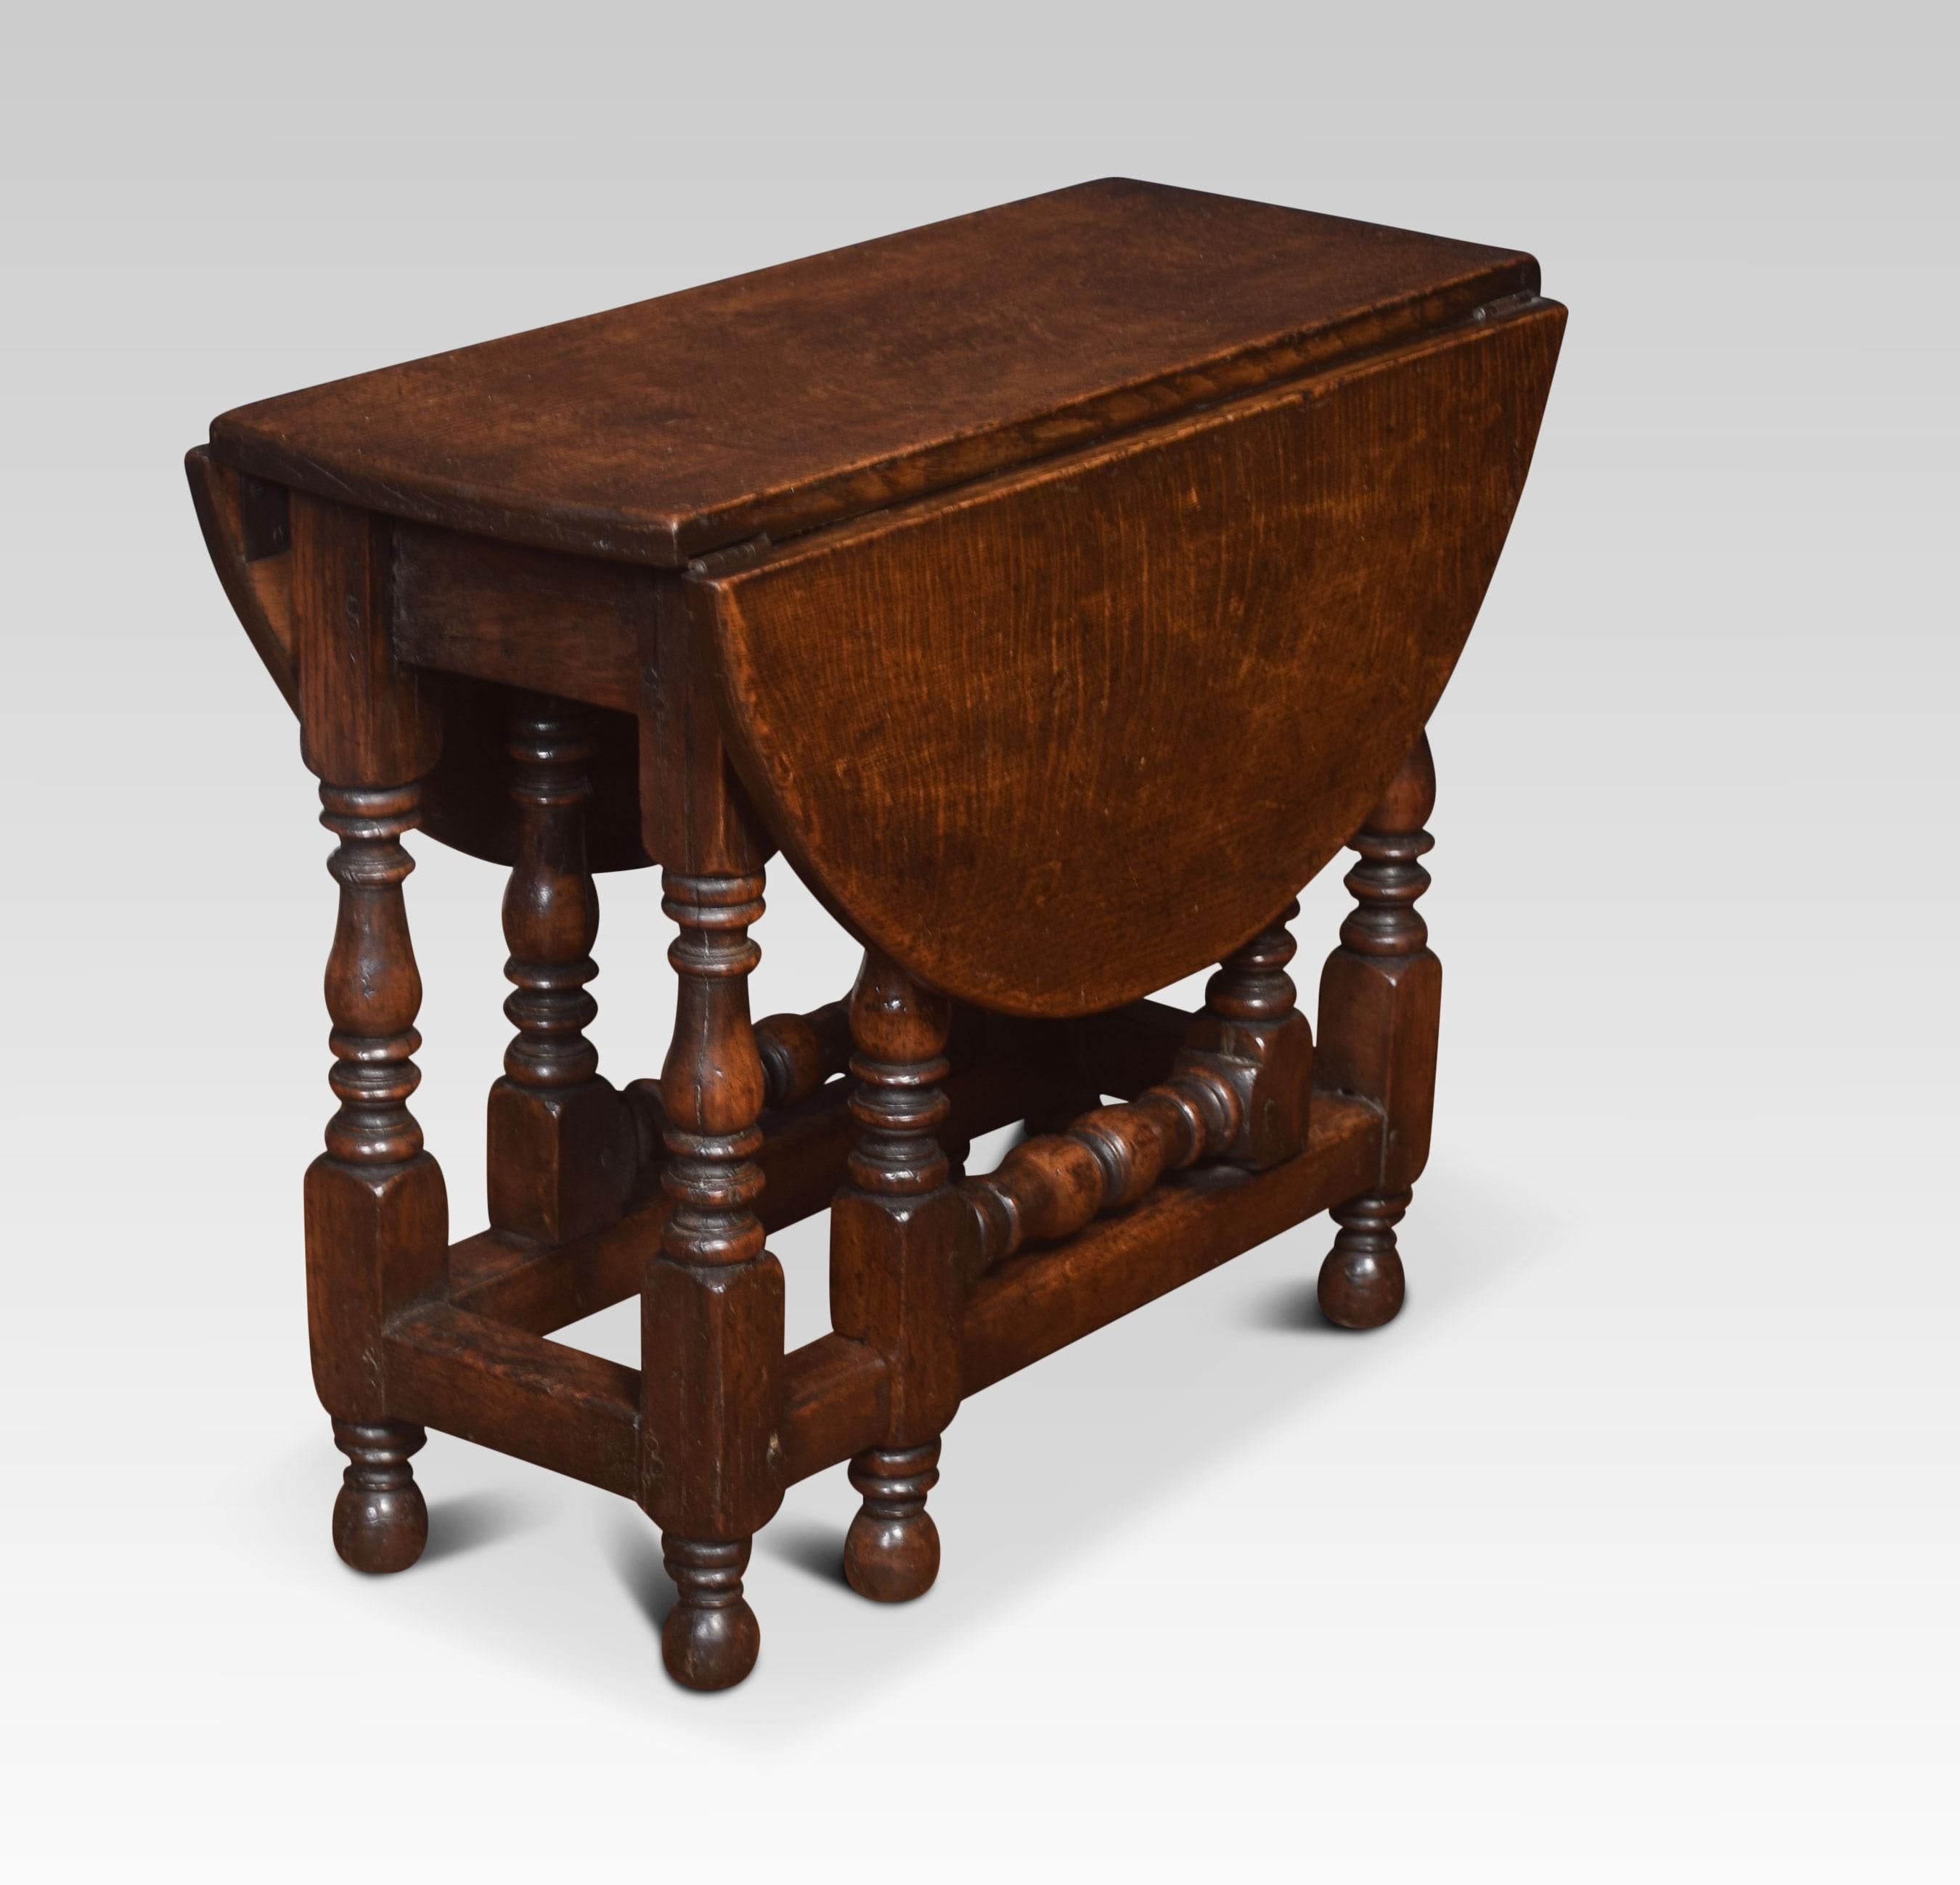 Solid oak gateleg table, having an oval drop-leaf top raised up on turned supports united by stretchers.
Dimensions:
Height 19 inches
Width 10.5 inches when open 27 inches
Depth 24 inches.